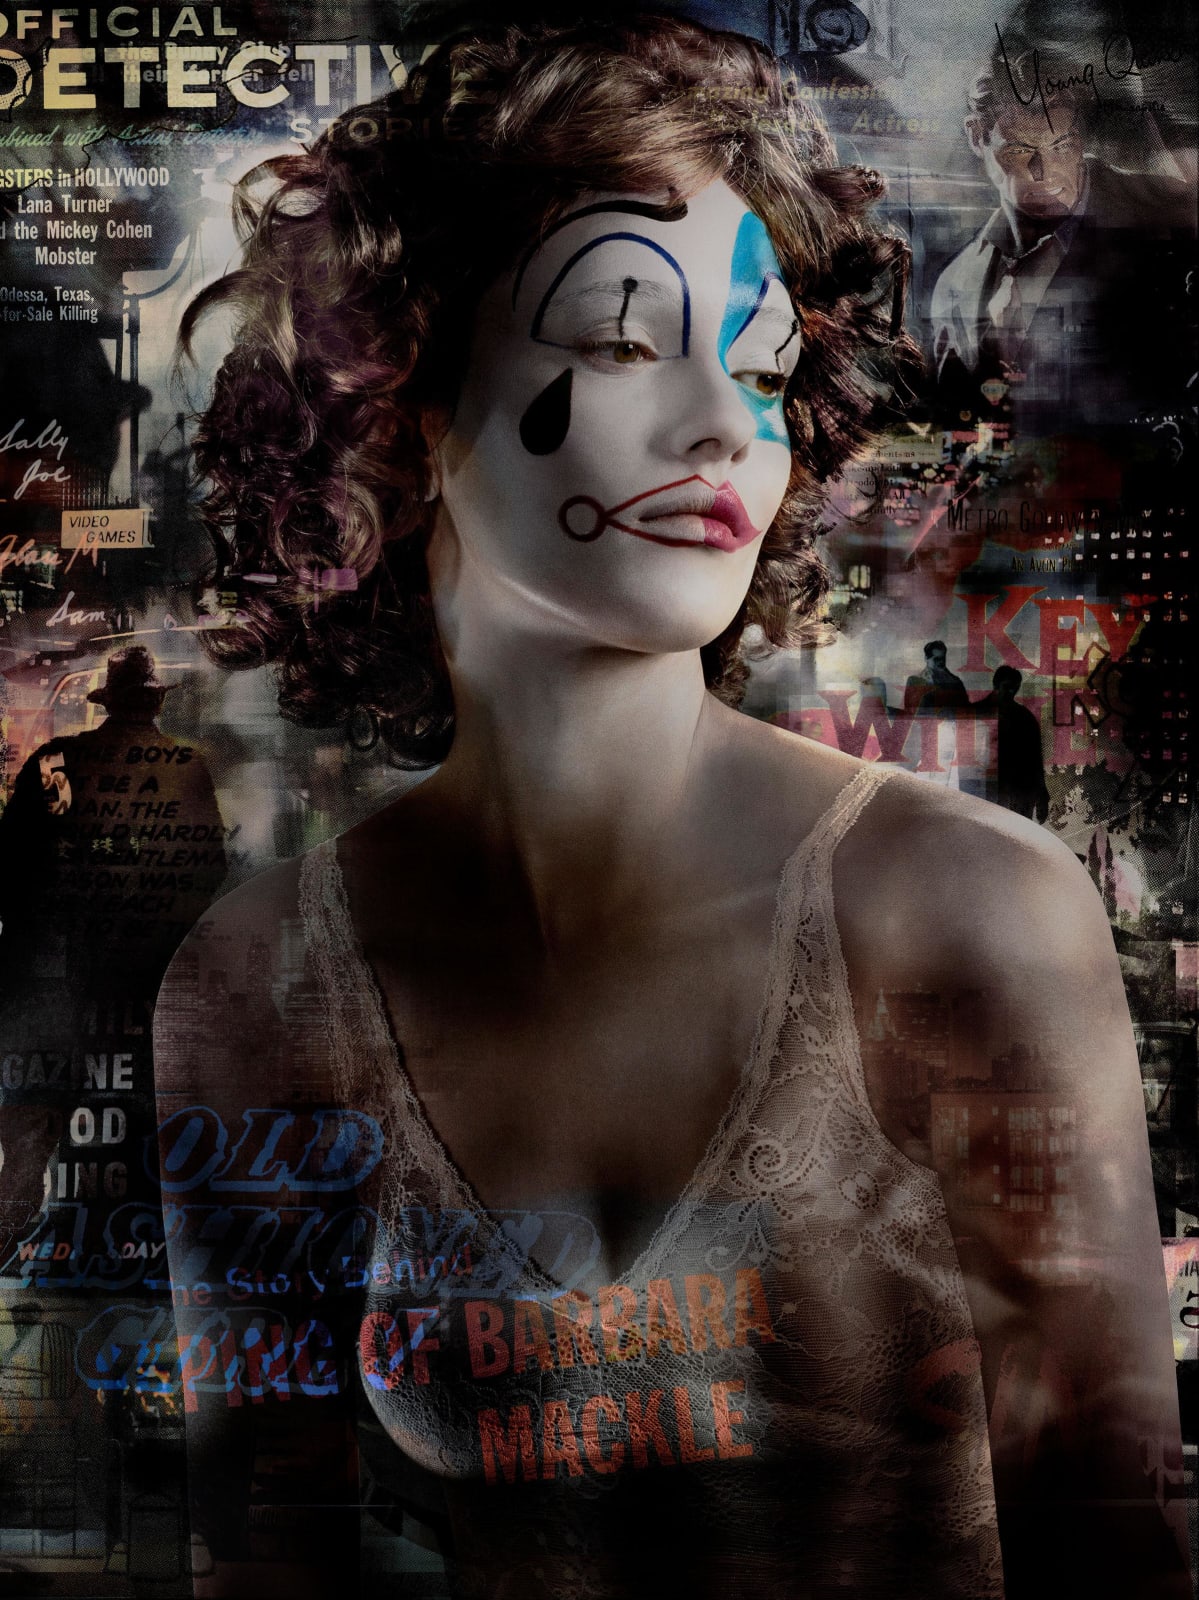 Valérie Belin Old Fashioned Girl portrait of woman in clown makeup with overlay of vintage city night scenes